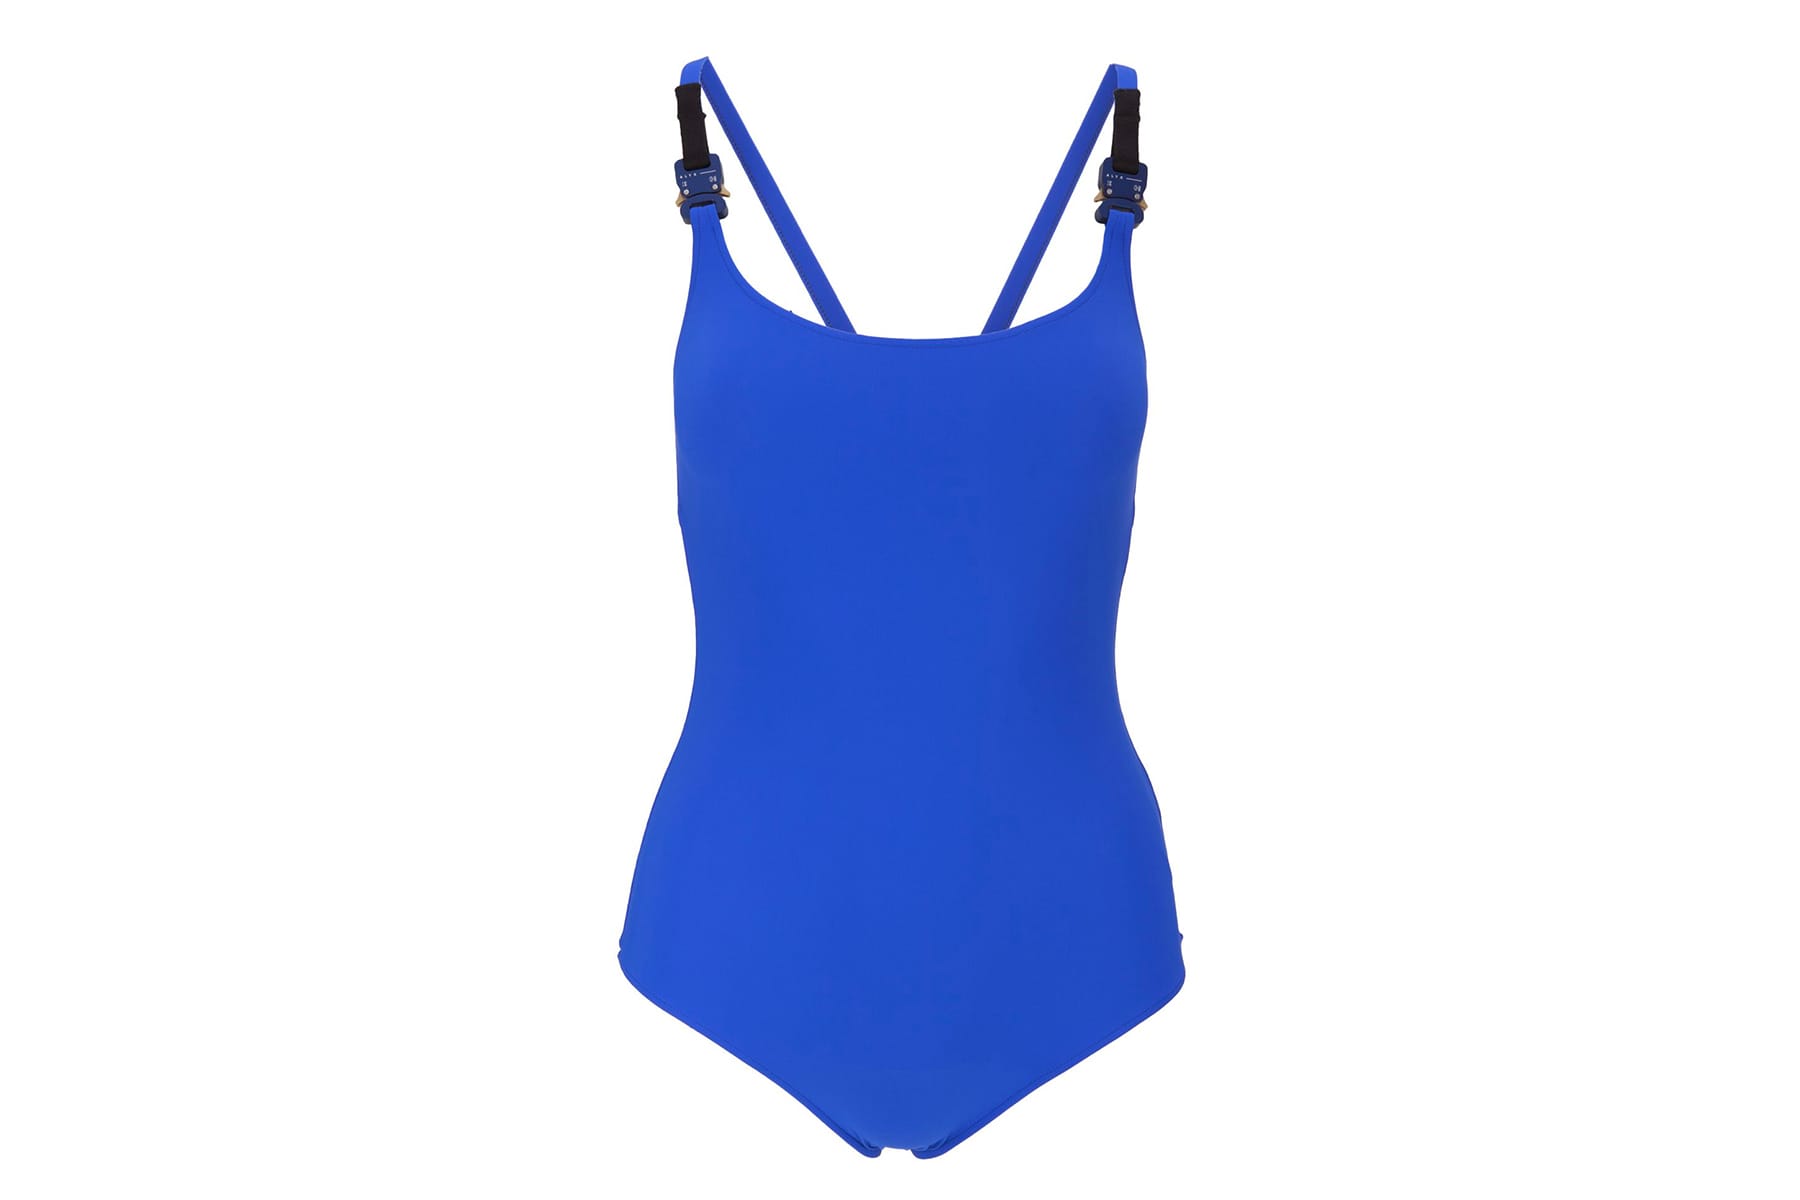 ALYX Releases Rollercoaster Buckle Swimsuits | IicfShops